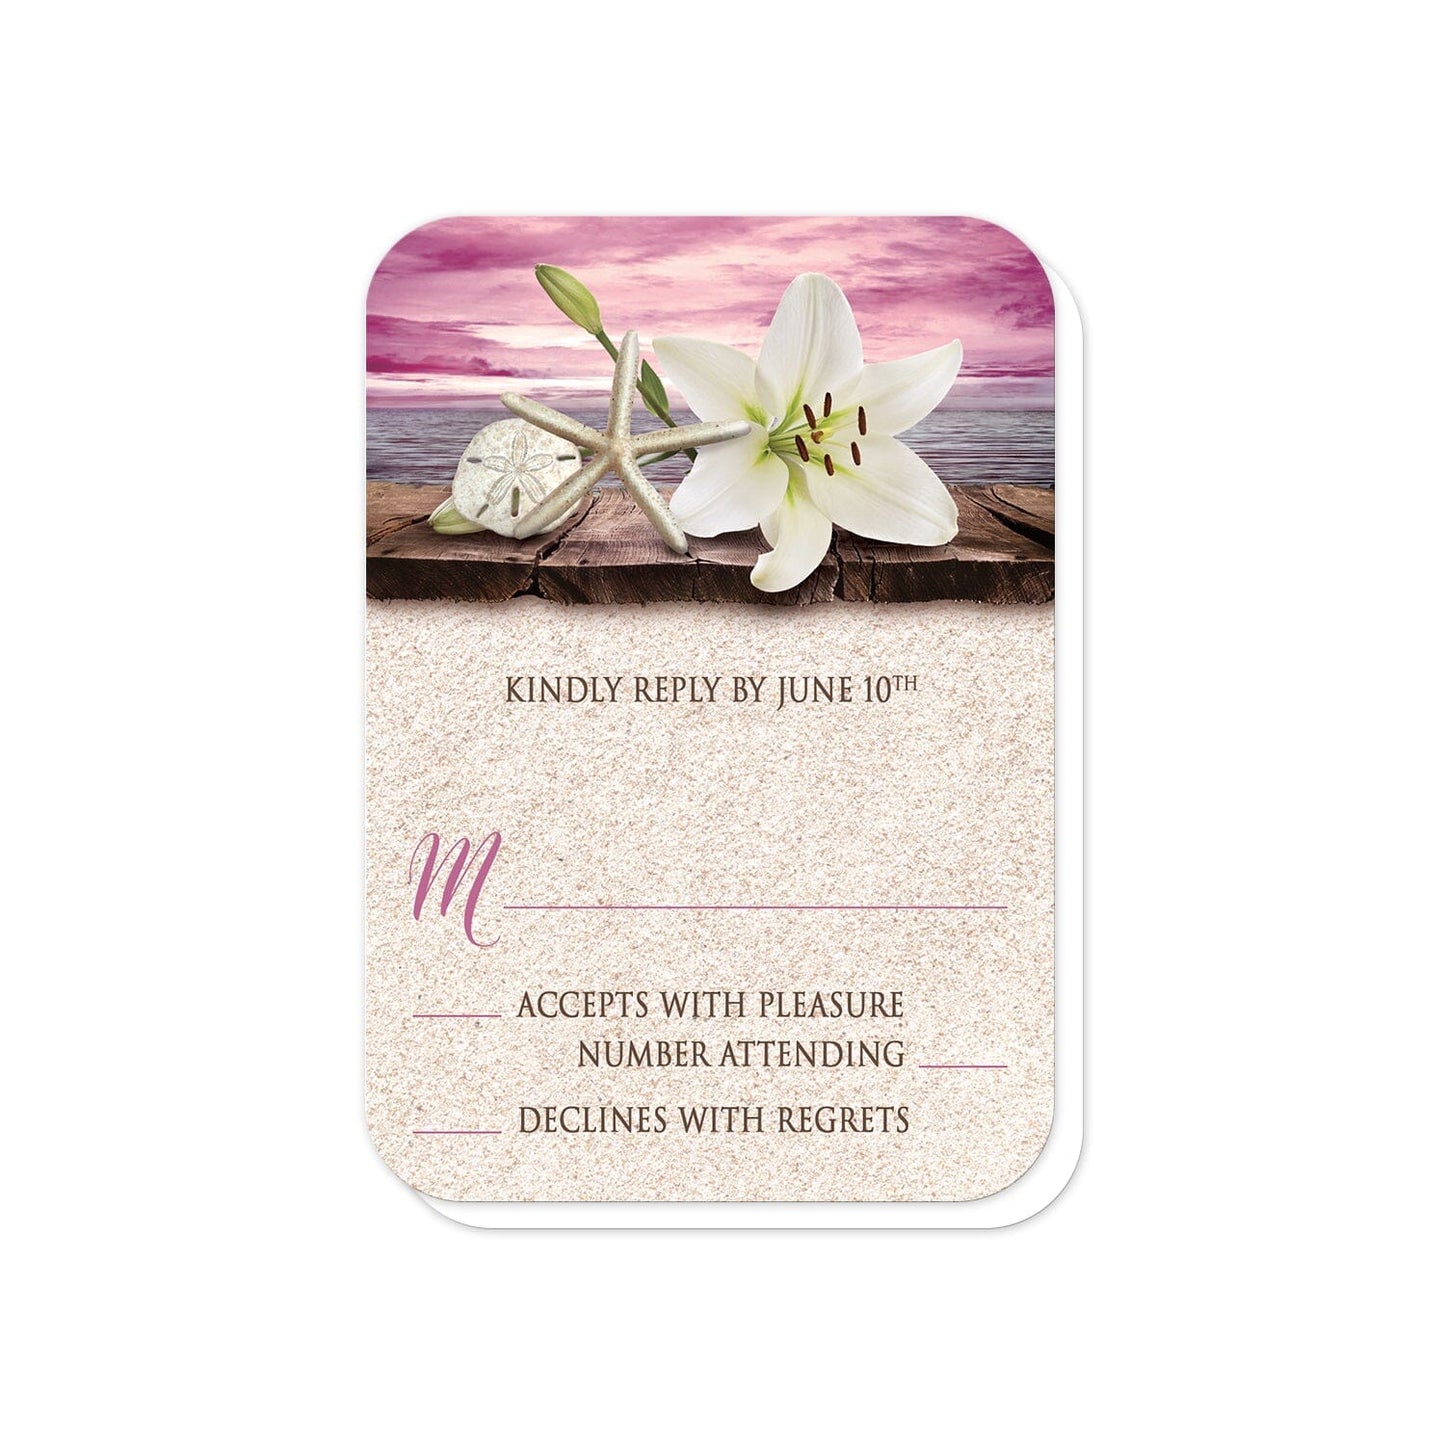 Lily Seashells and Sand Magenta Beach RSVP Cards (with rounded corners) at Artistically Invited.